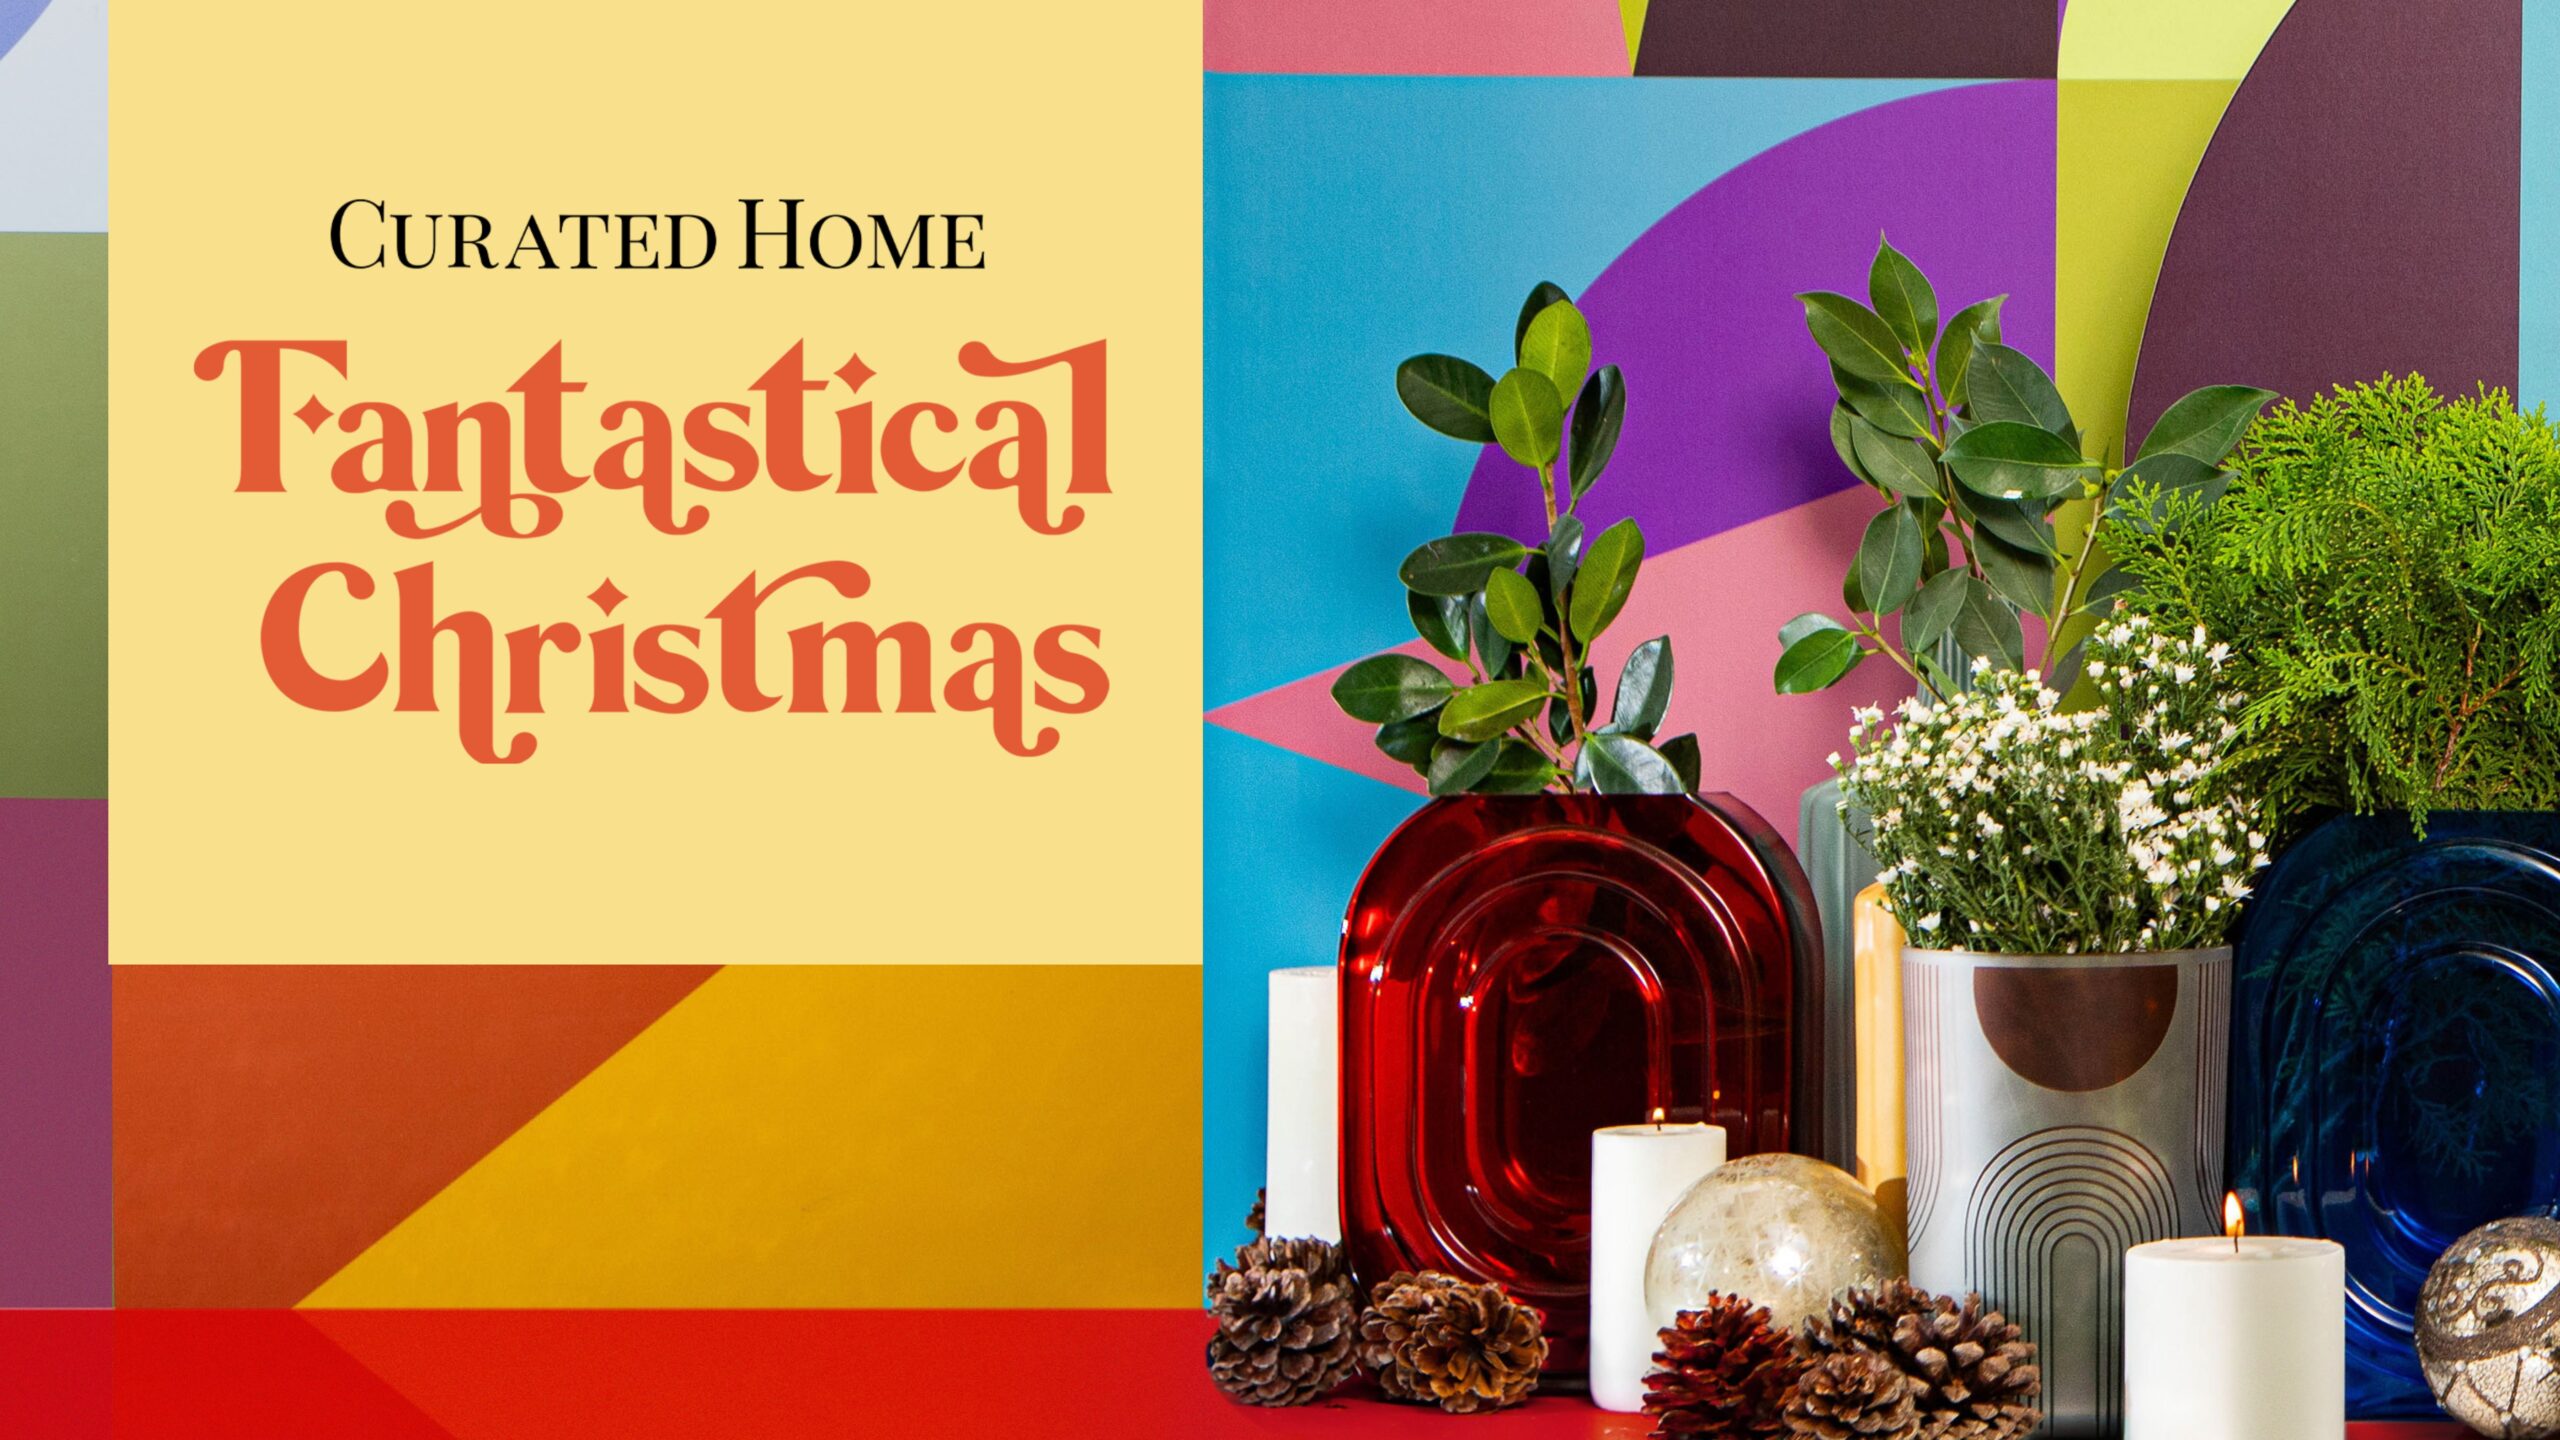 Curated Home’s ‘Fantastical Christmas’ decor line brings a nice blend of elegance and practicality